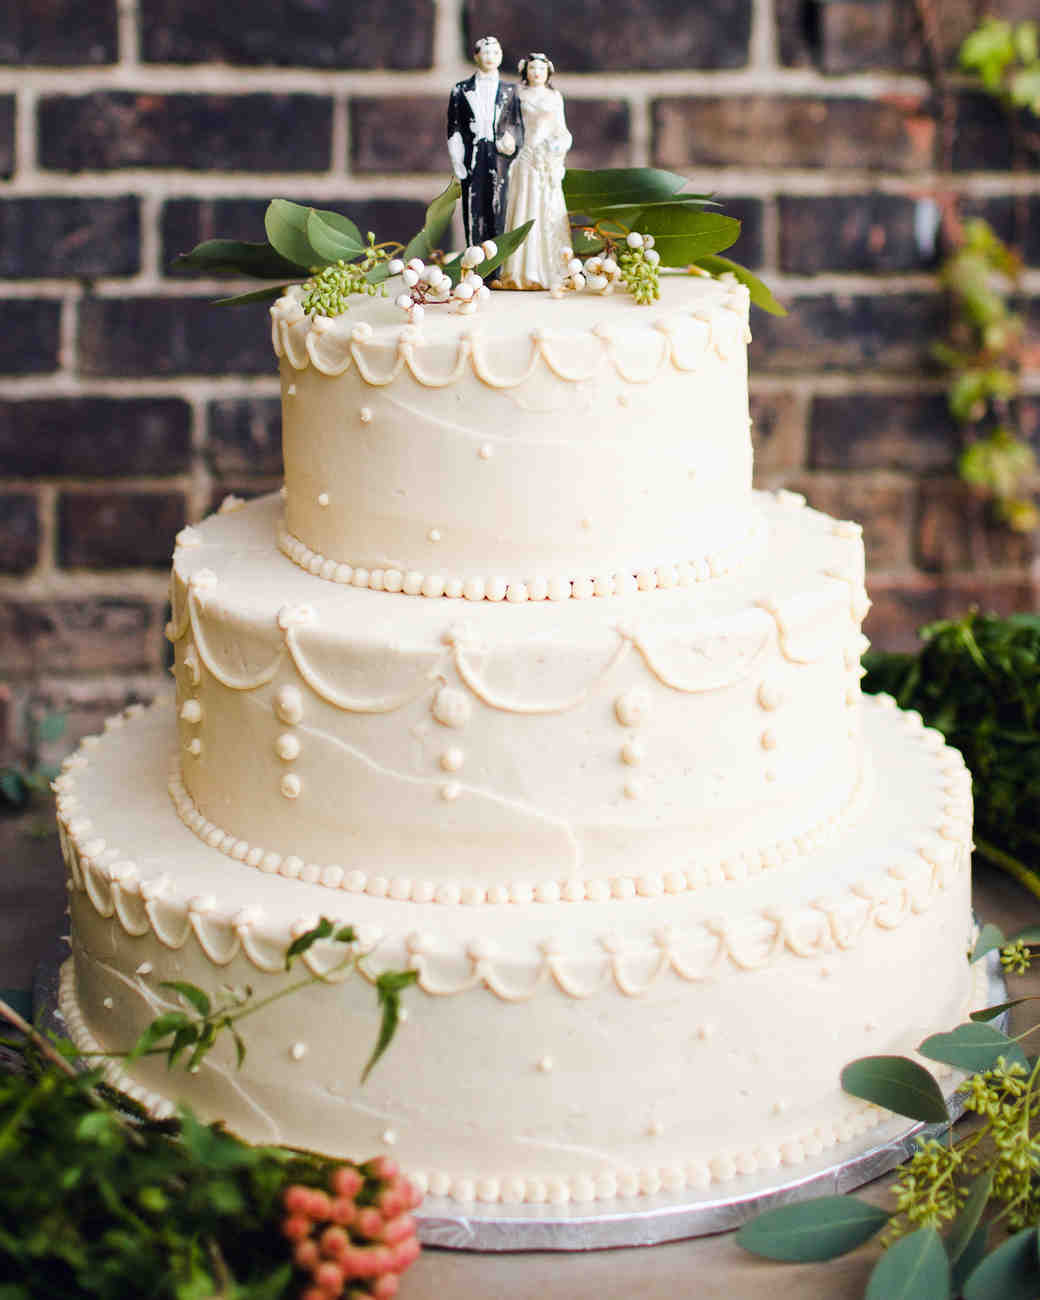 Need inspiration for your wedding cake? Try turning to the past. These vintage-inspired wedding confections are as gorgeous and retro as they come. Click throug